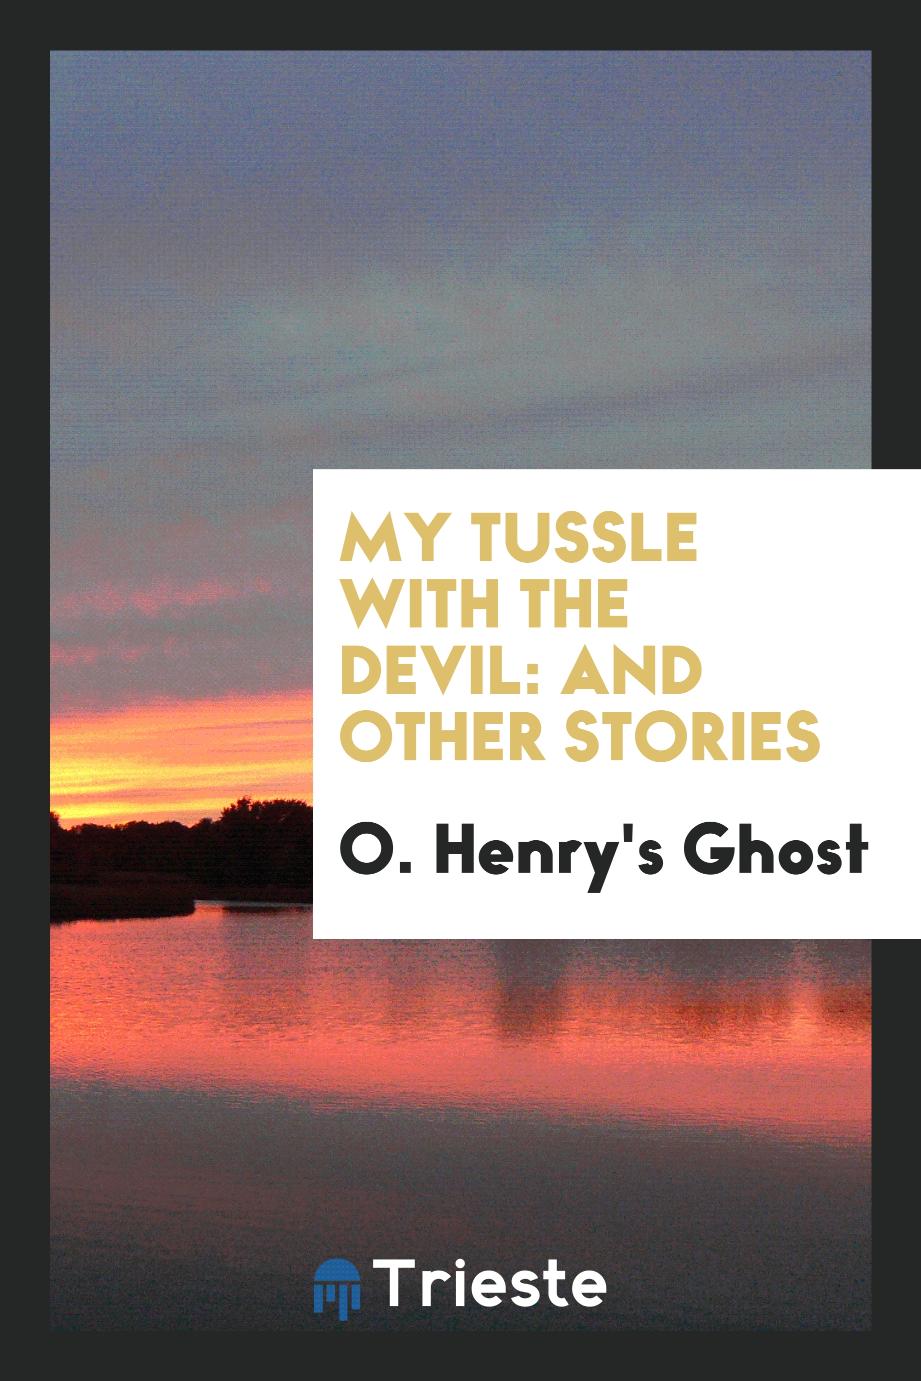 My tussle with the devil: and other stories